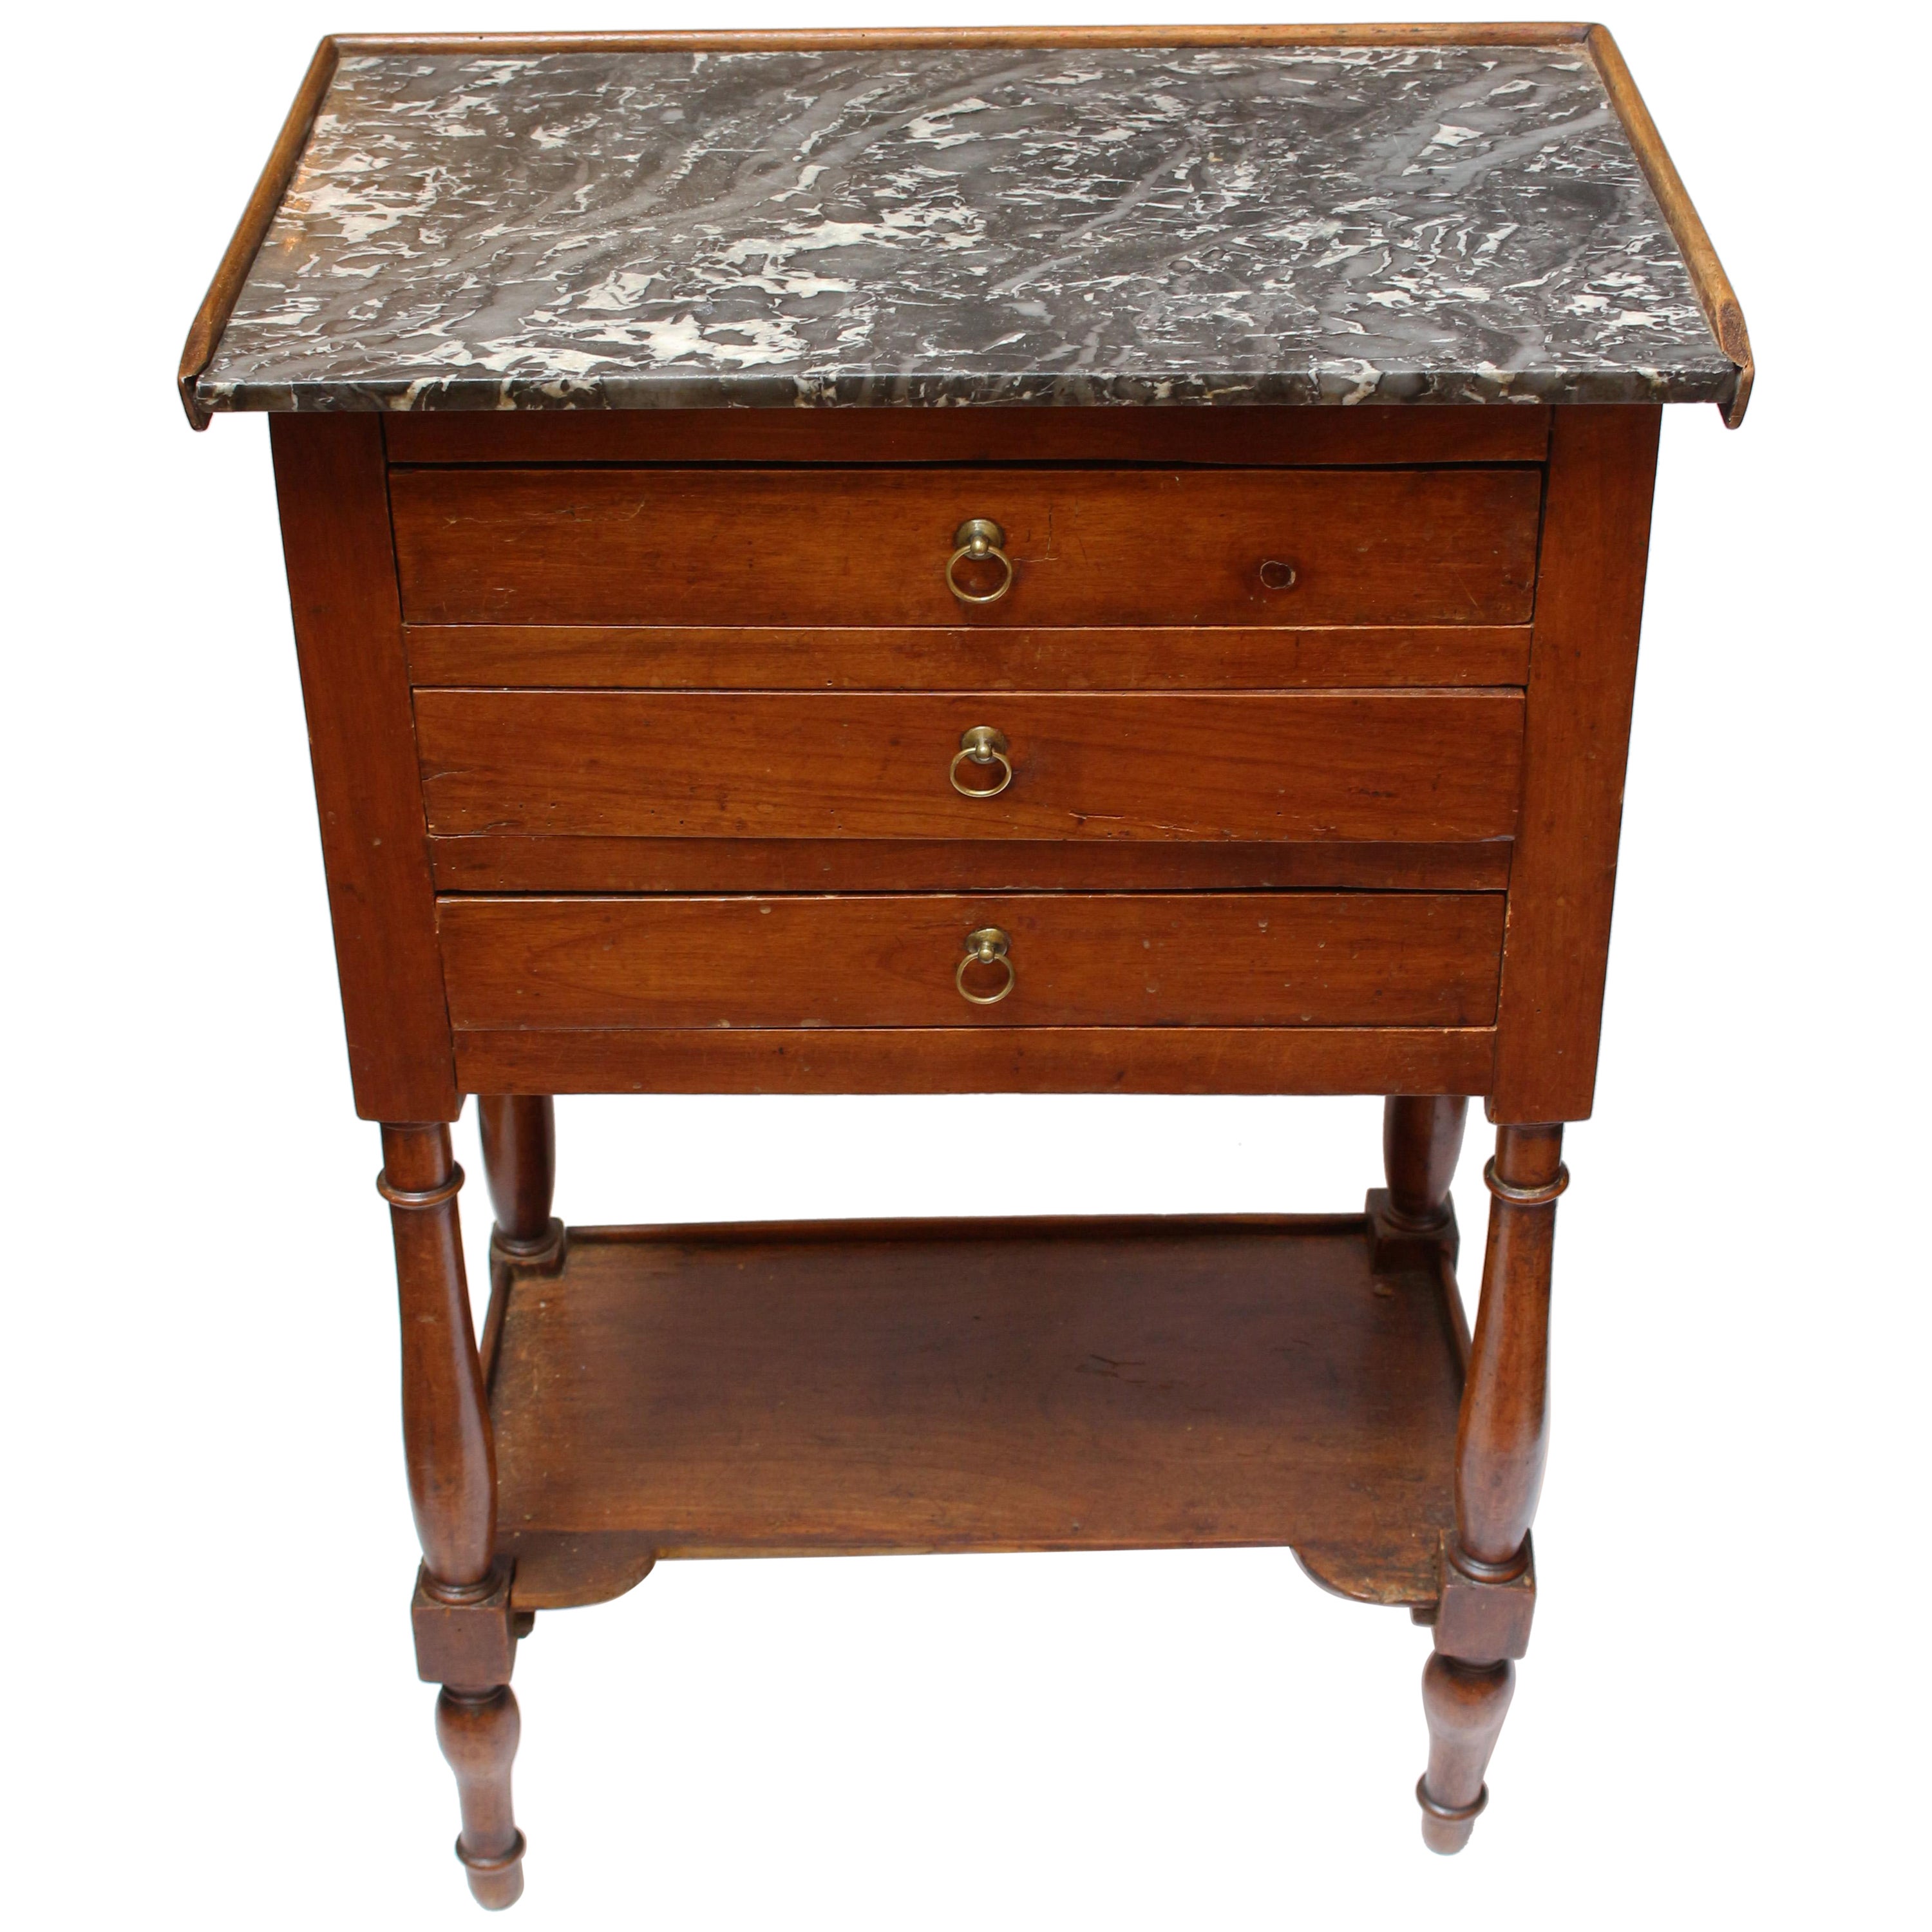 Mid-19th Century French Marble Top Chevet